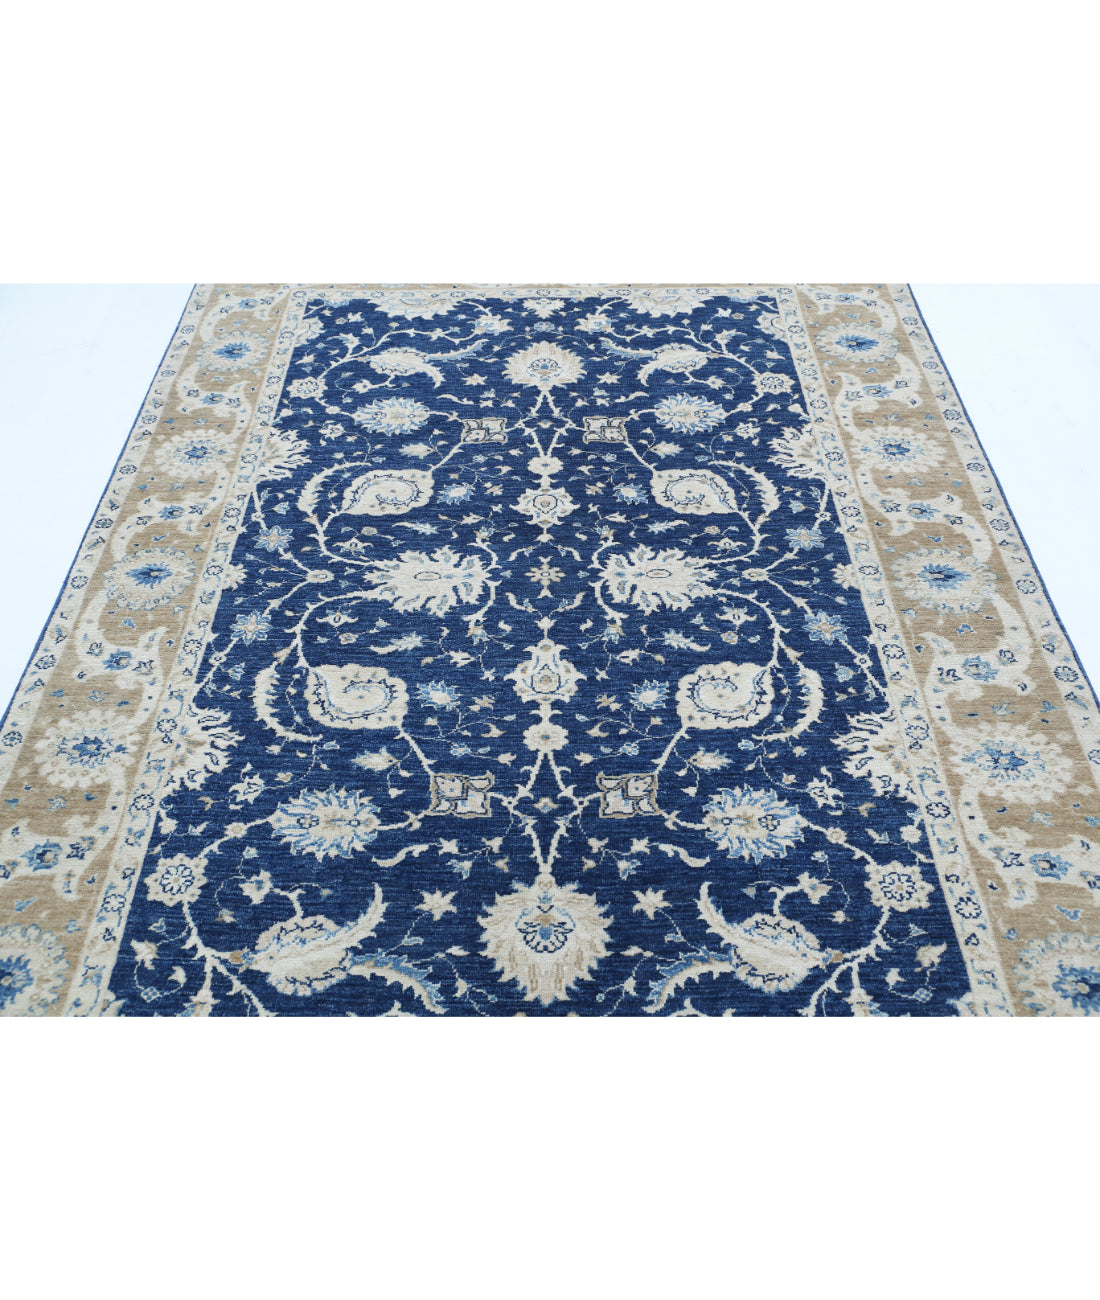 Hand Knotted Ziegler Farhan Wool Rug - 5'6'' x 7'11'' 5'6'' x 7'11'' (165 X 238) / Blue / Taupe